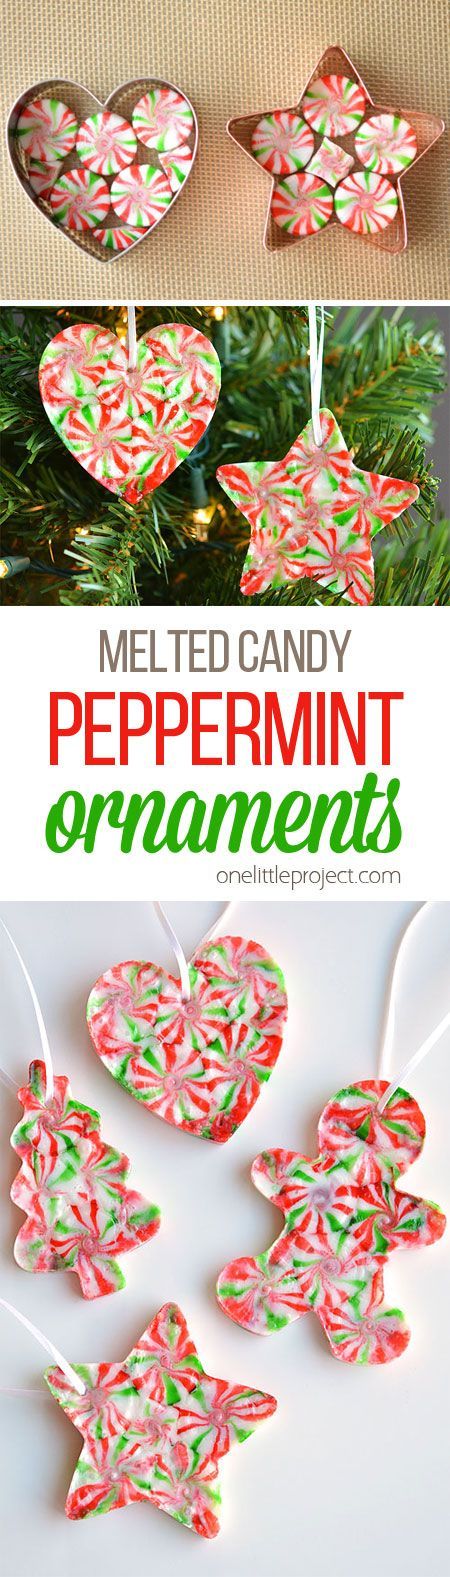 DIY Crafts - These melted peppermint candy ornaments are ADORABLE and ...